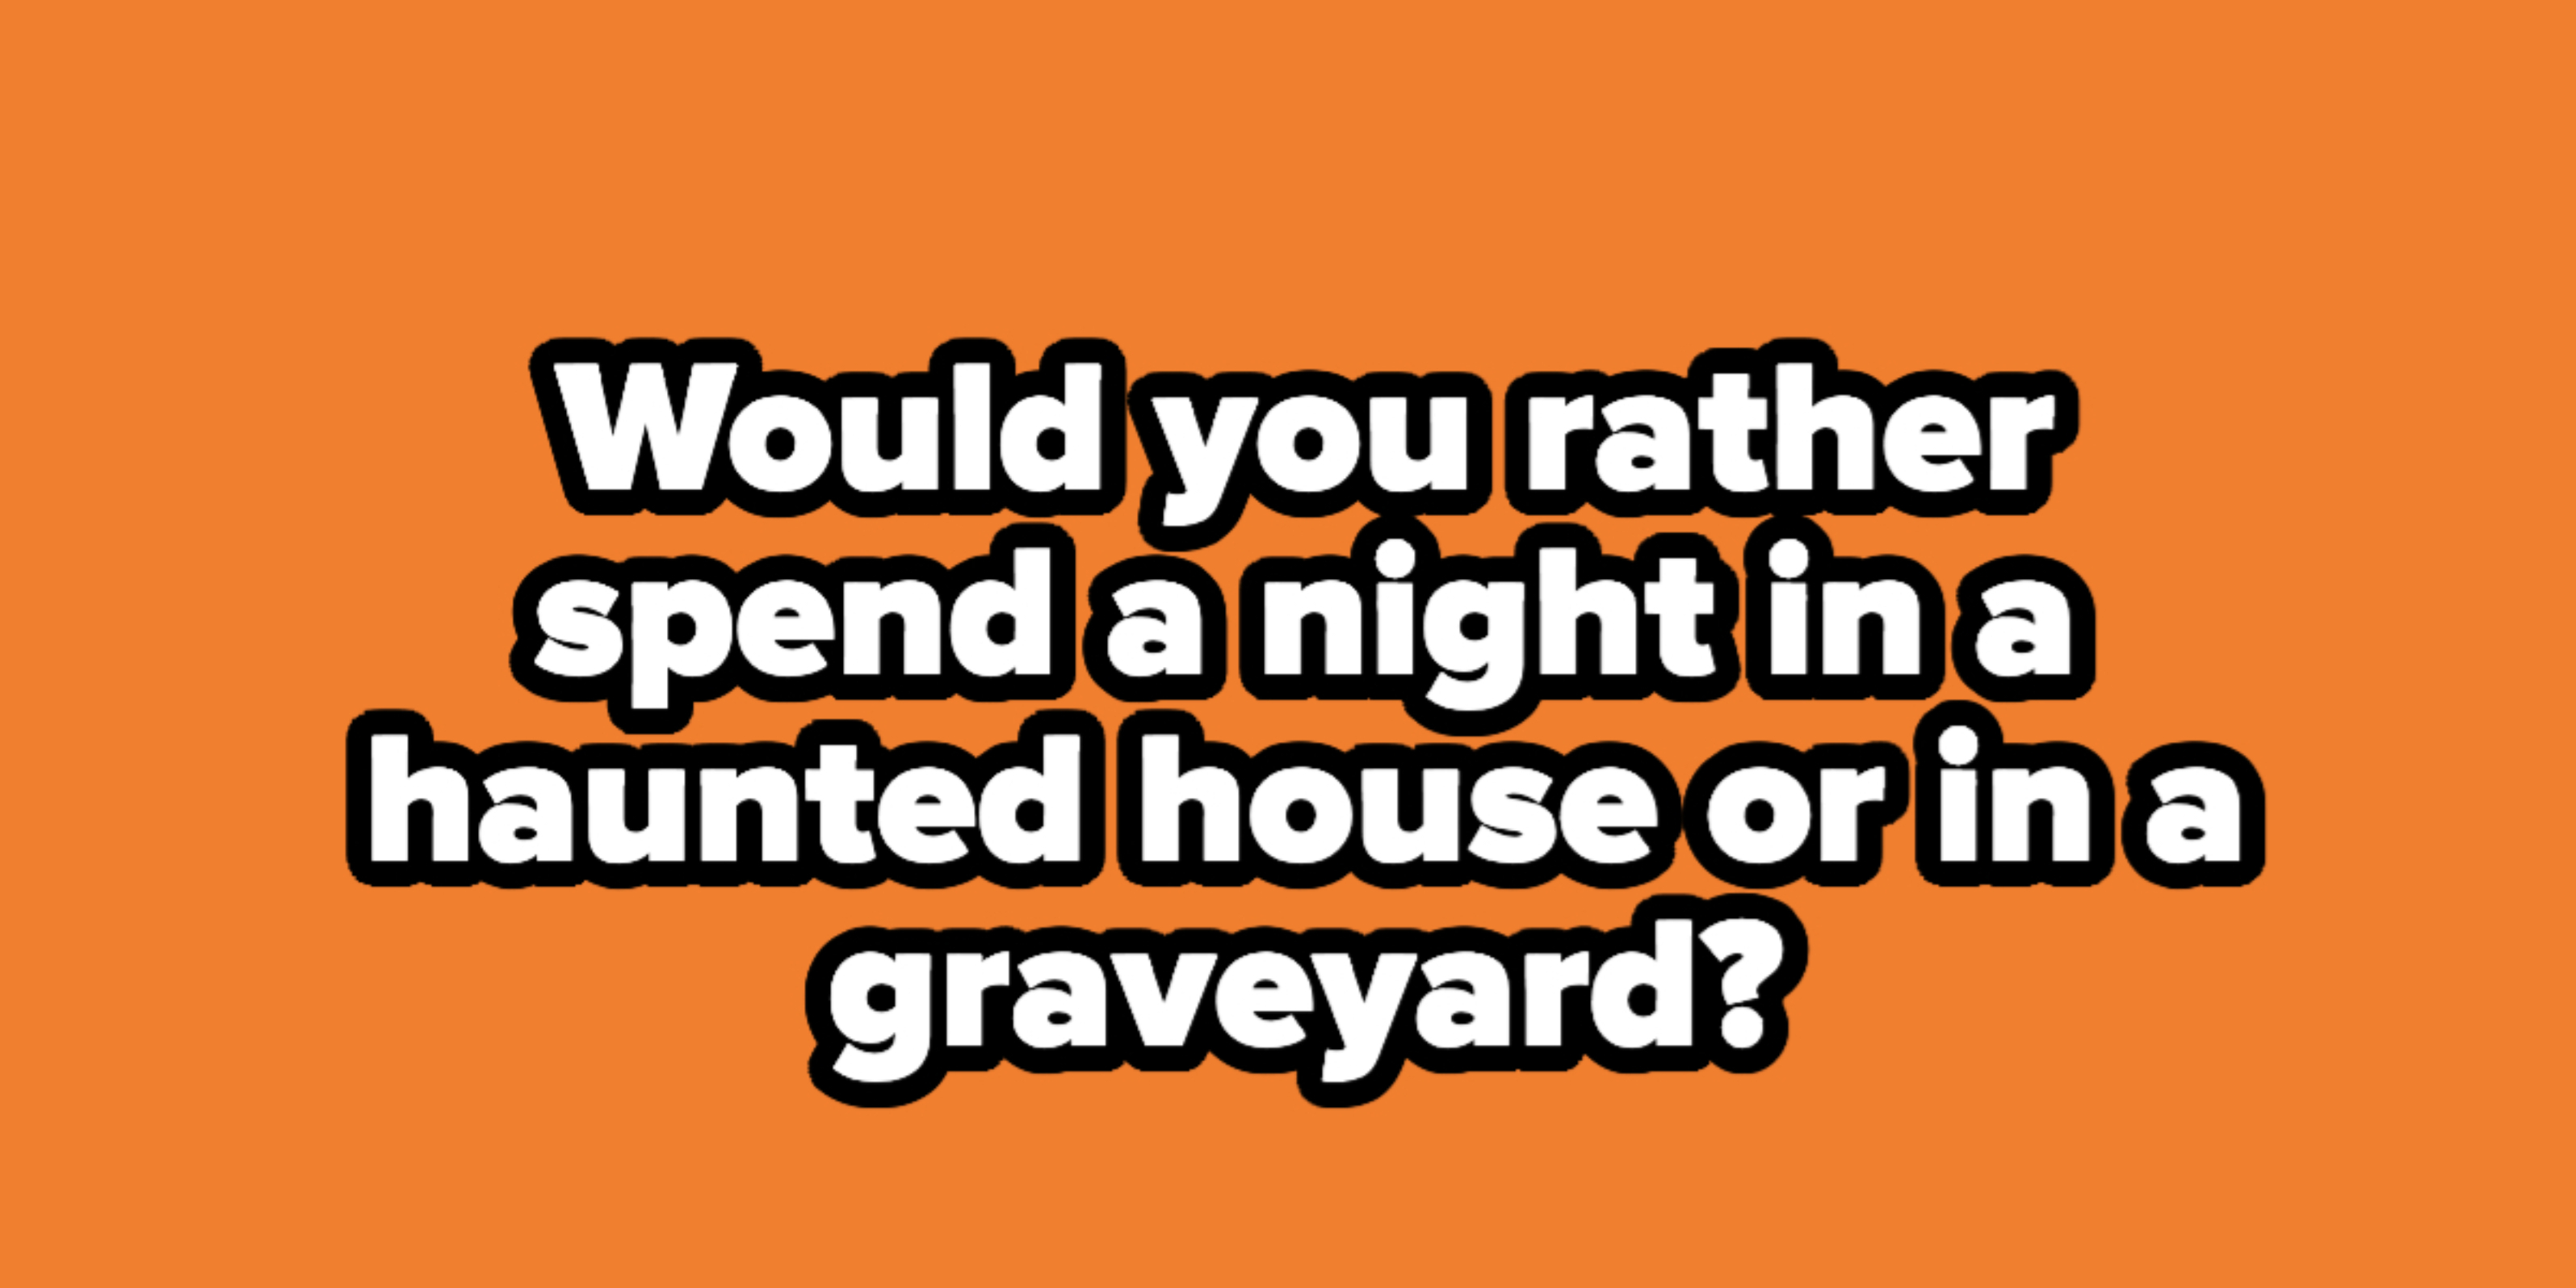 Halloween Would you Rather Quiz